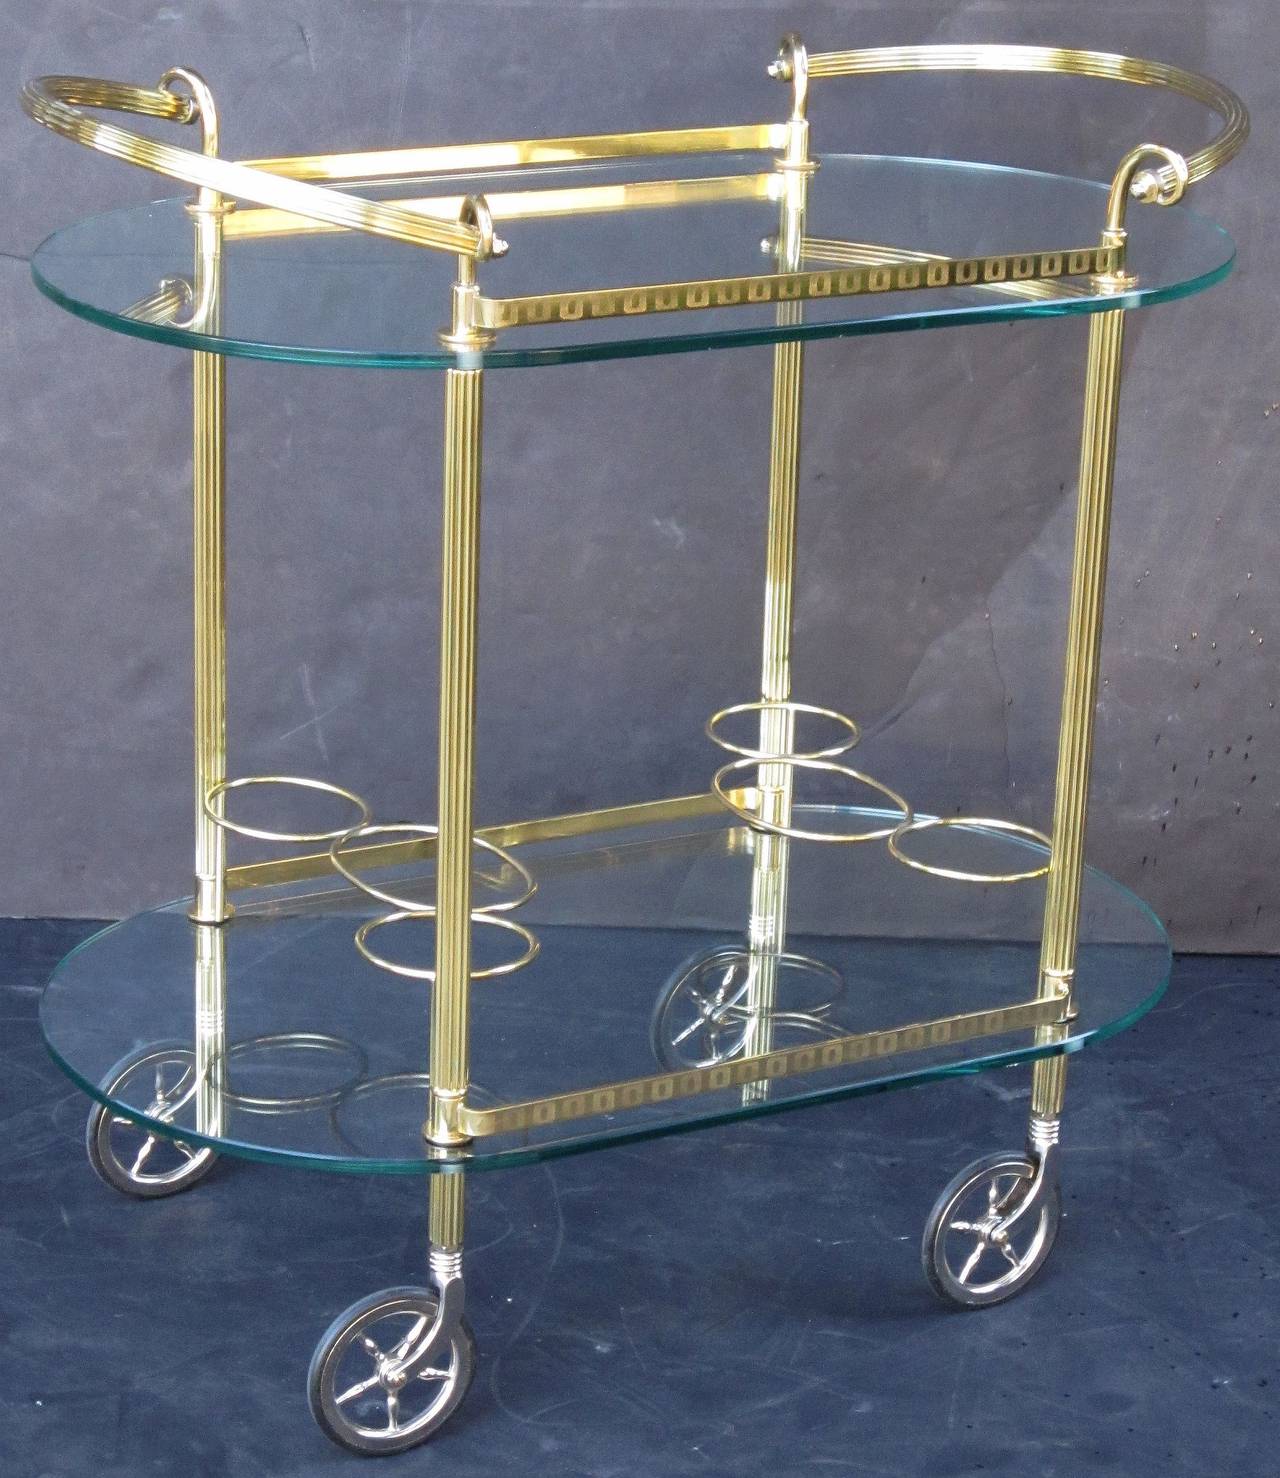 A vintage French oval drinks cart or serving trolley (bar cart) of brass and glass with etched rail galleries on two tiers, and bottle holders, on spoked rolling caster wheels. 

Perfect for use as a side or end table.